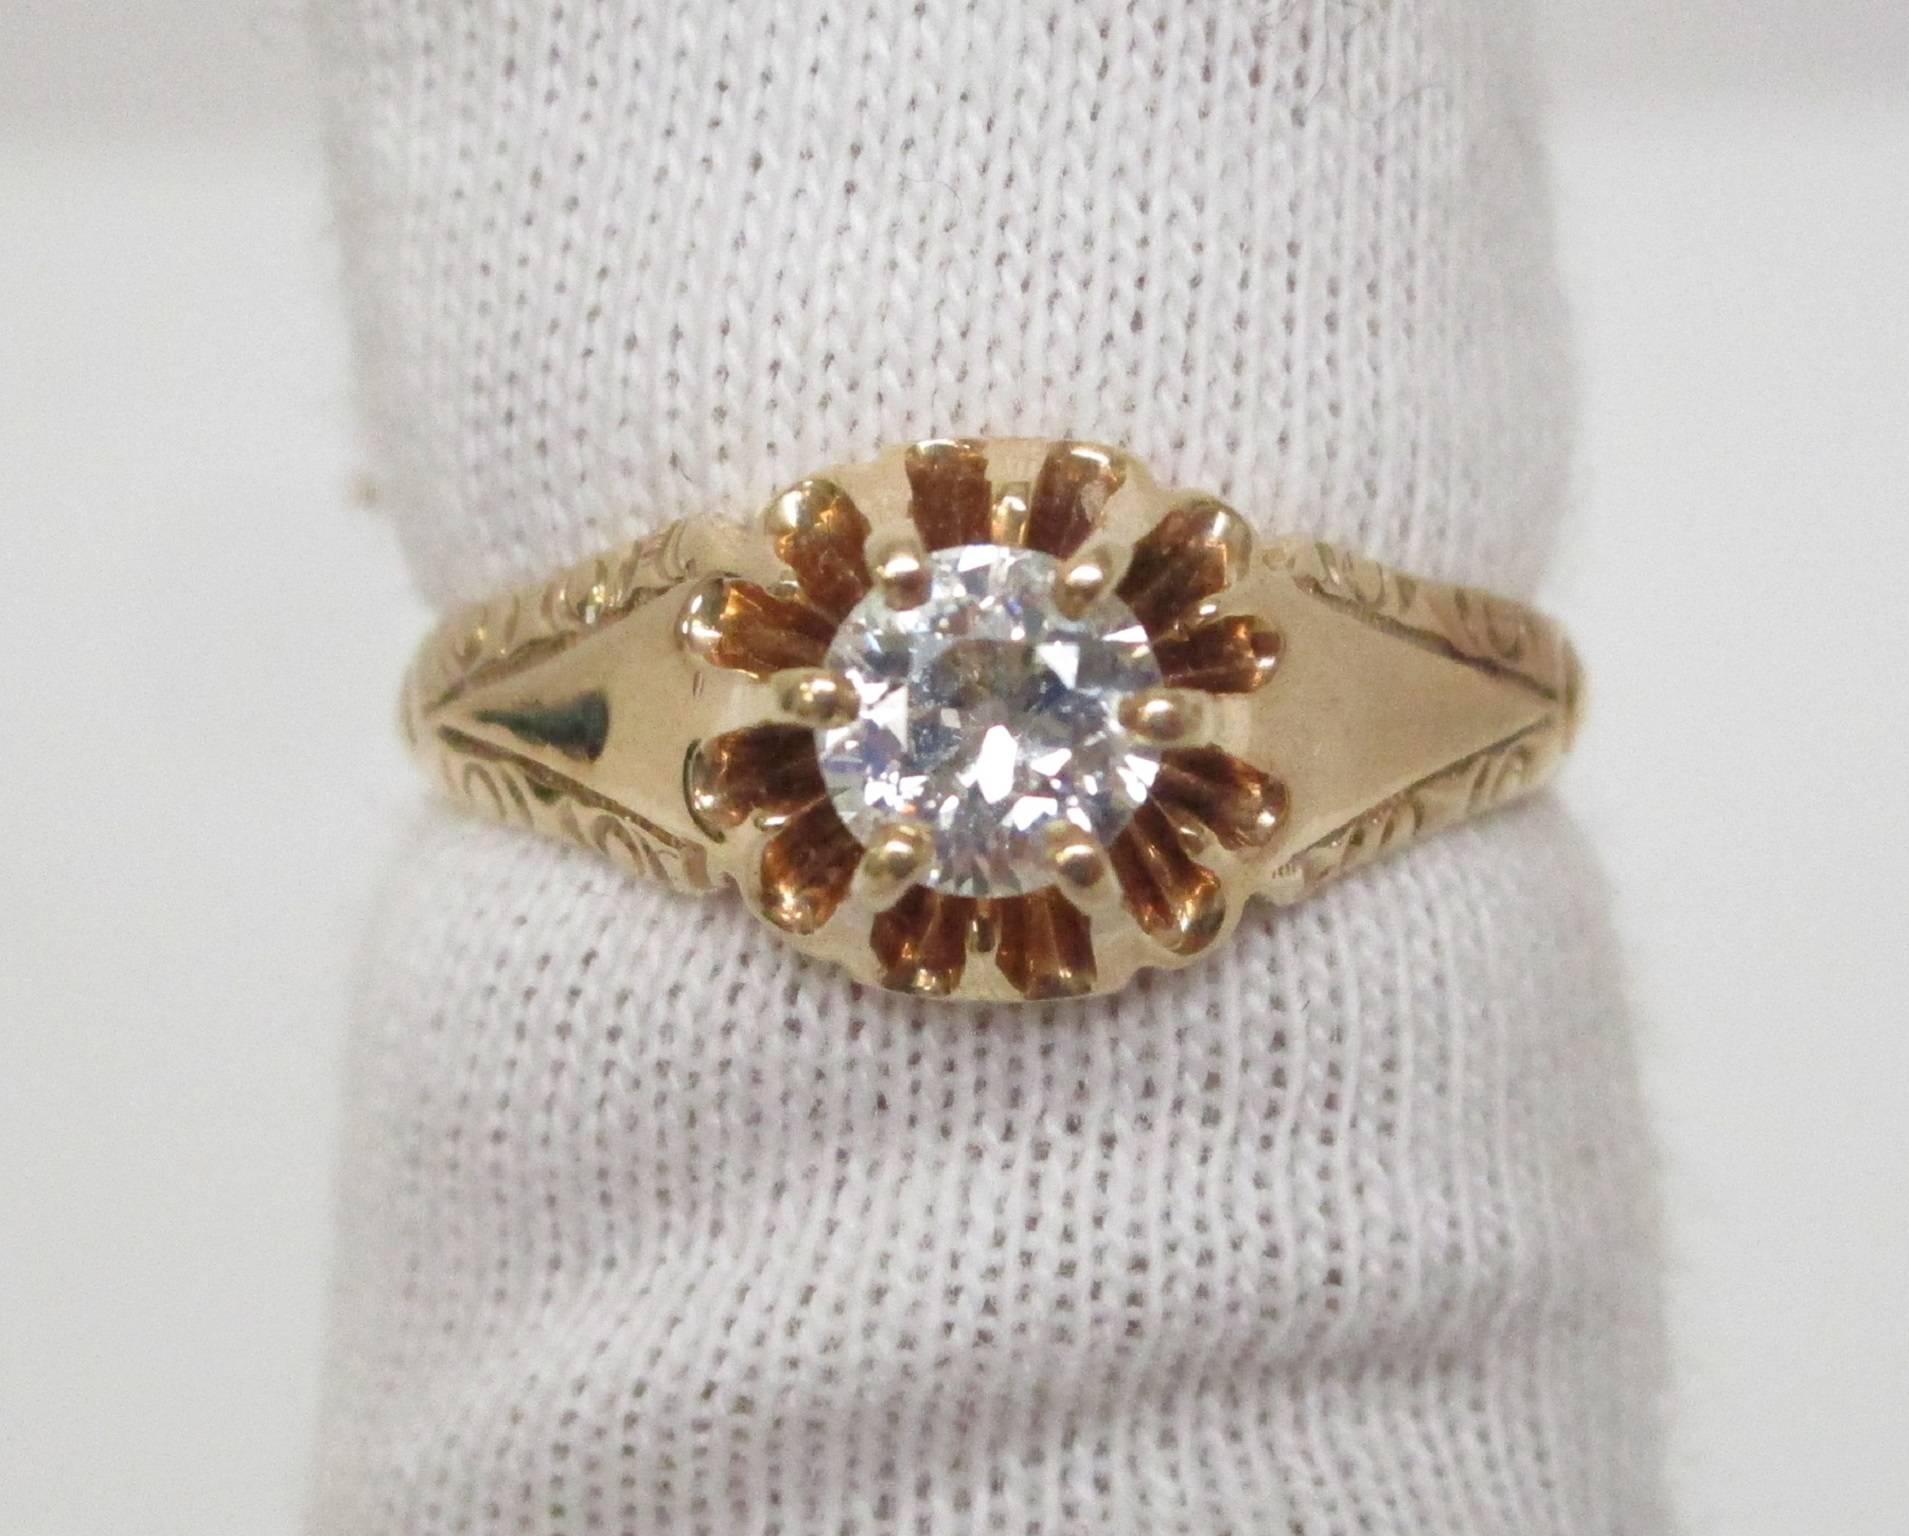 This Victorian-era engagement ring has a love language all its own. A striking diamond is in a warm embrace with a 14k yellow gold band. The twinkle of the diamond flirts with the shimmer of the gold and creates a dance of passion and lust. The